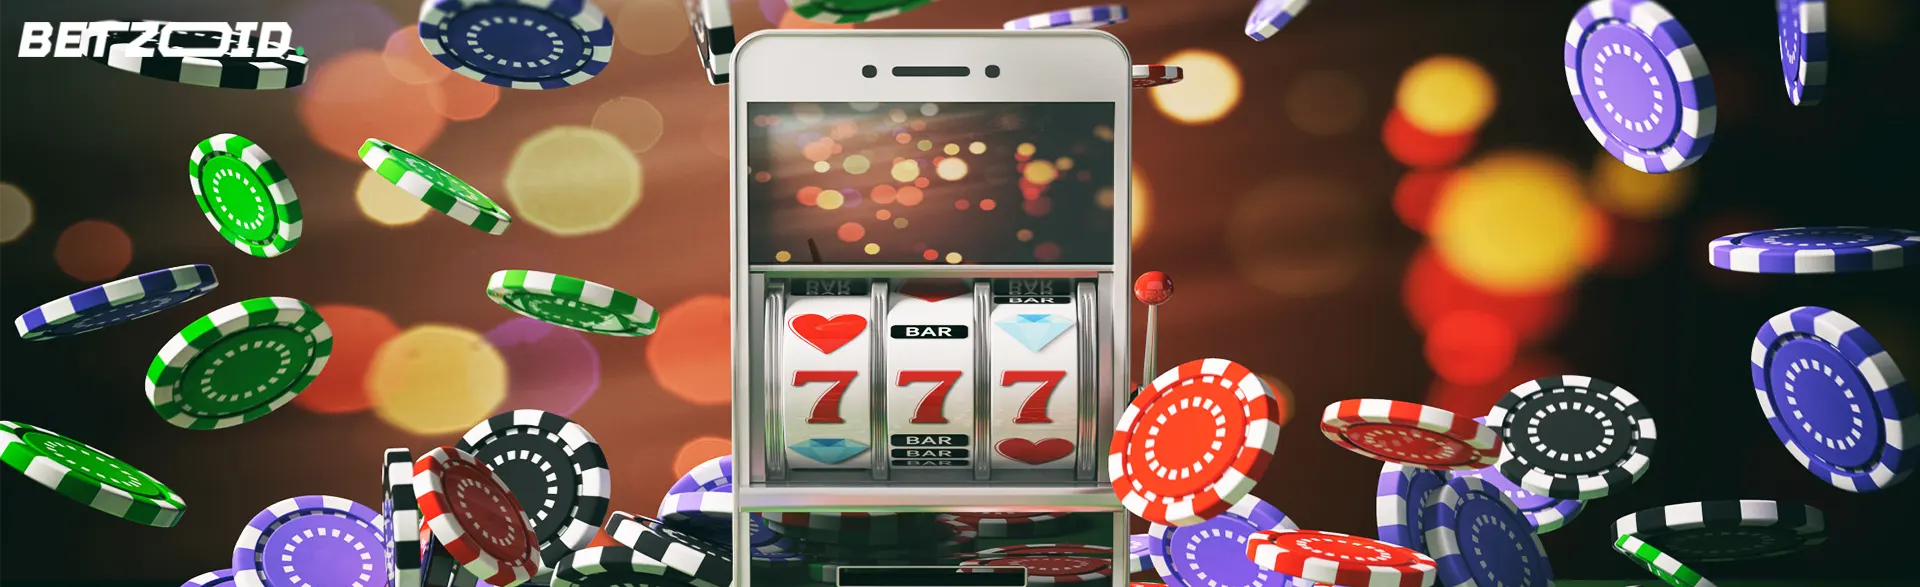 An Adnoid casino displaying a slot machine app, surrounded by casino chips.